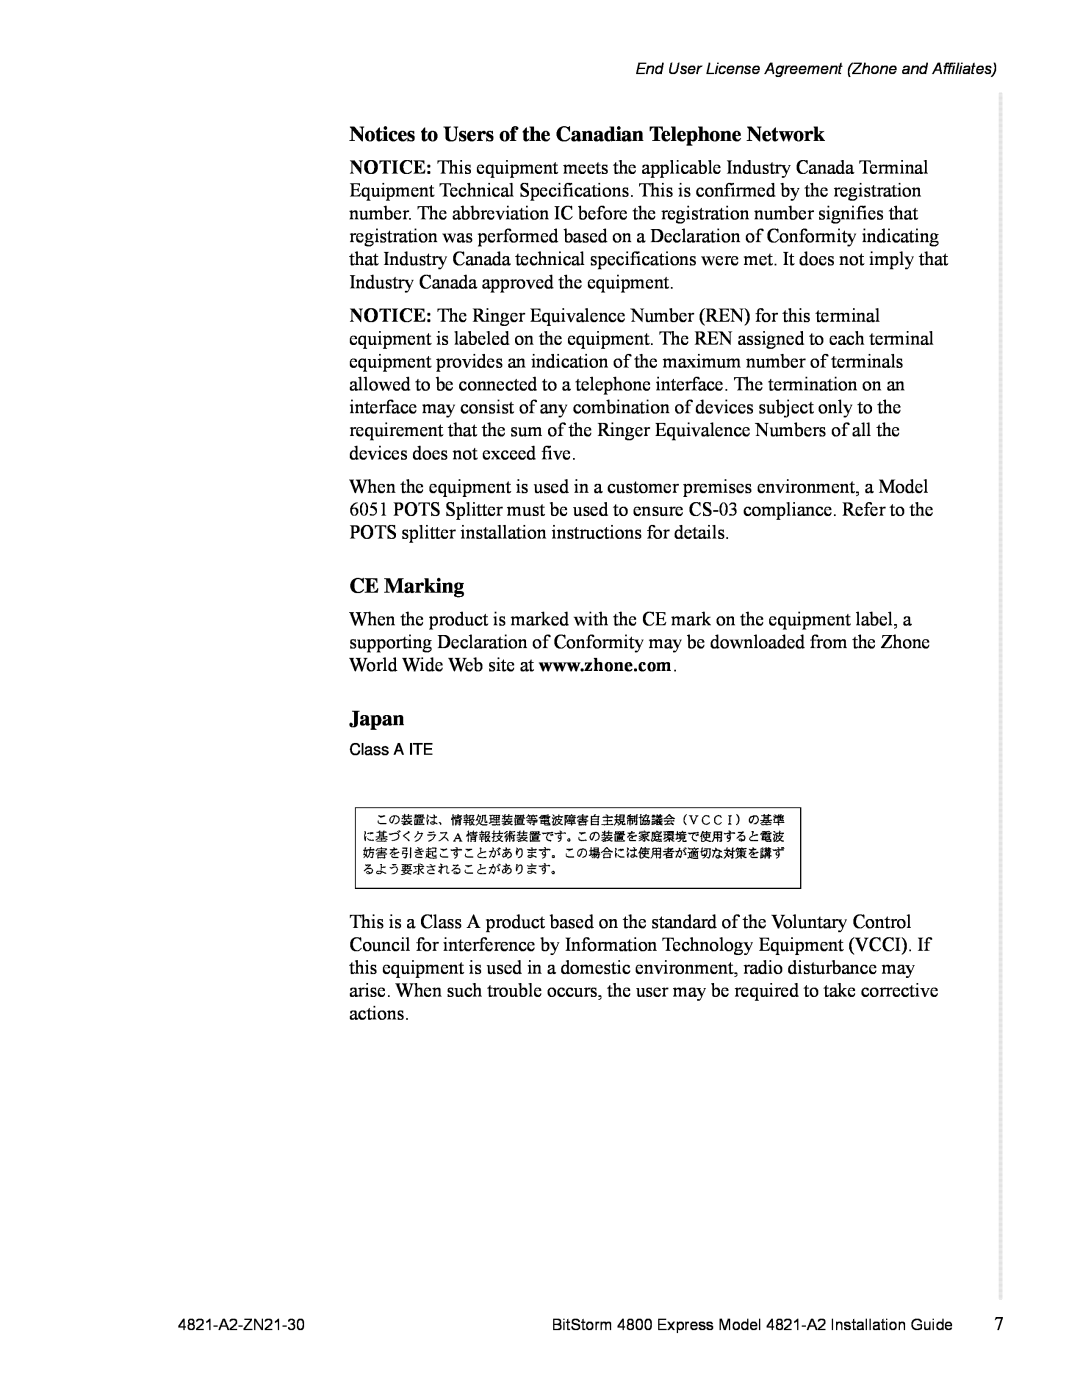 Zhone Technologies 4821-A2 manual Notices to Users of the Canadian Telephone Network, CE Marking, Japan, Class A ITE 